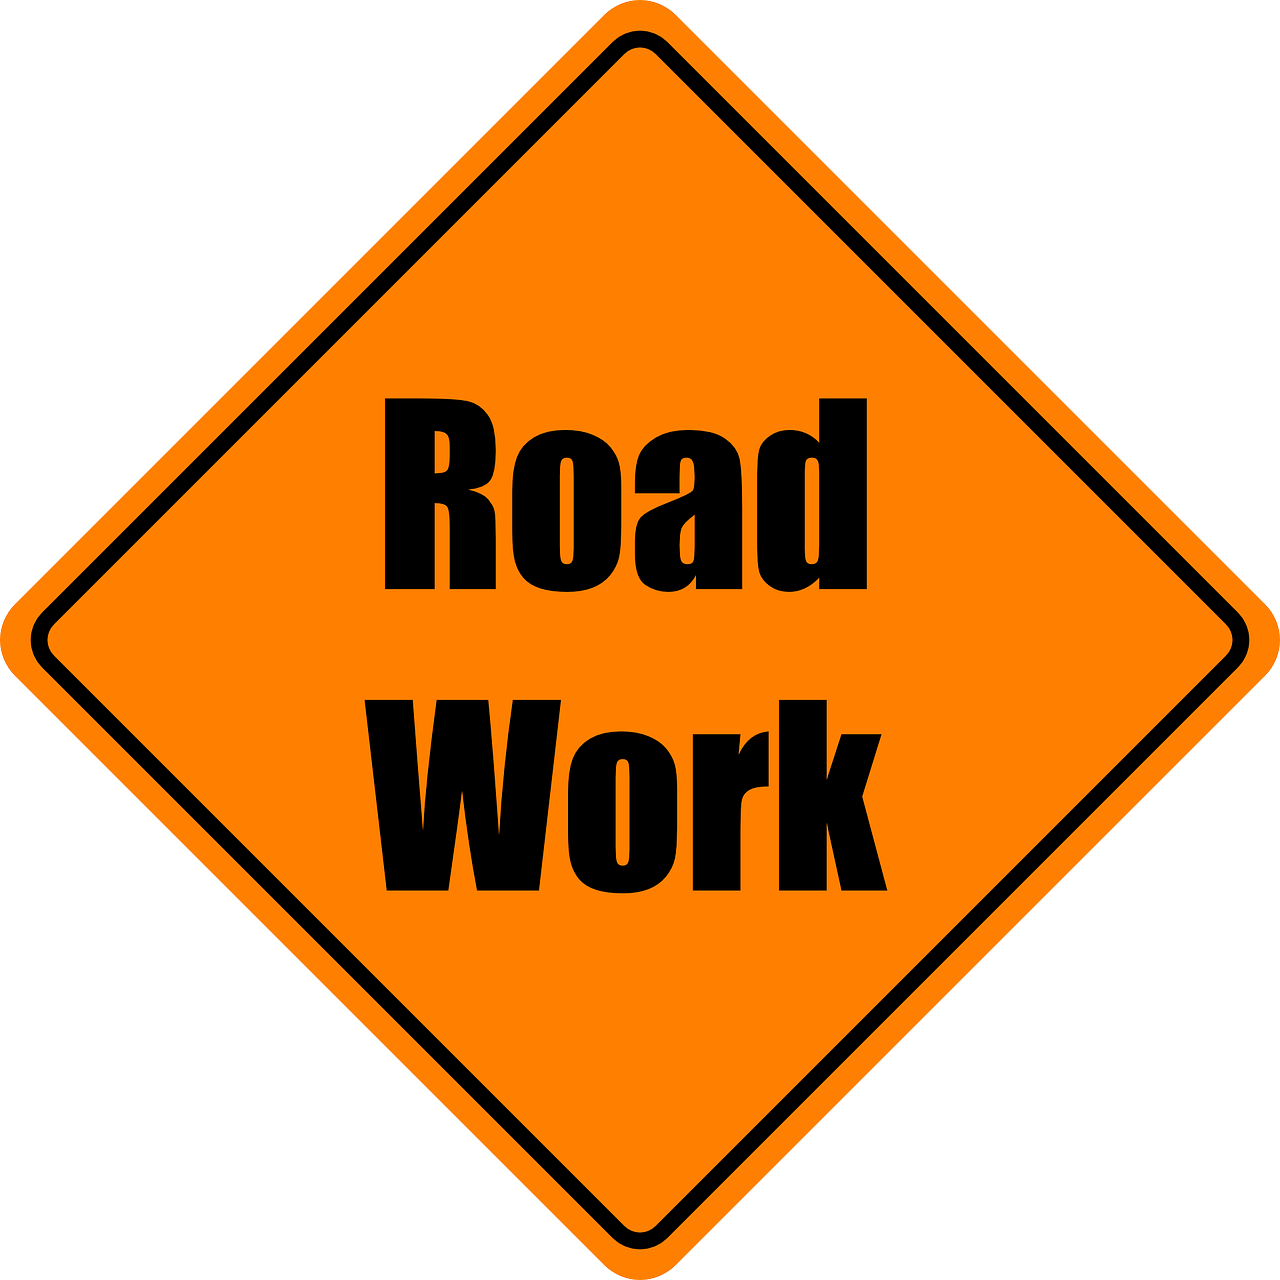 Road work graphic